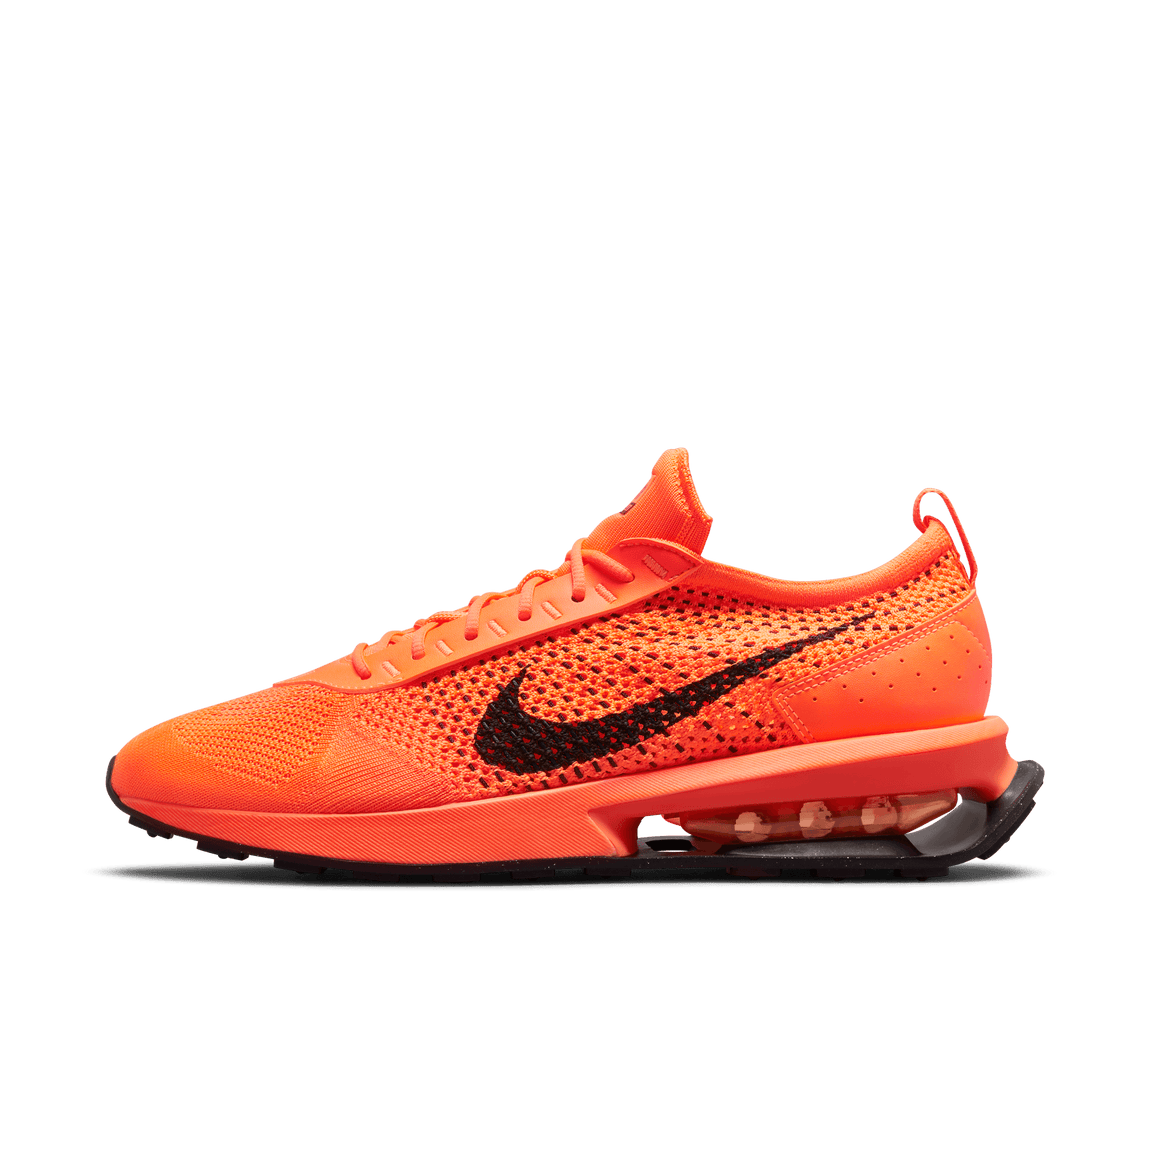 Nike Air Max Flyknit Racer Next Nature (Total Orange/Black) - Nike Air Max Flyknit Racer Next Nature (Total Orange/Black) - 